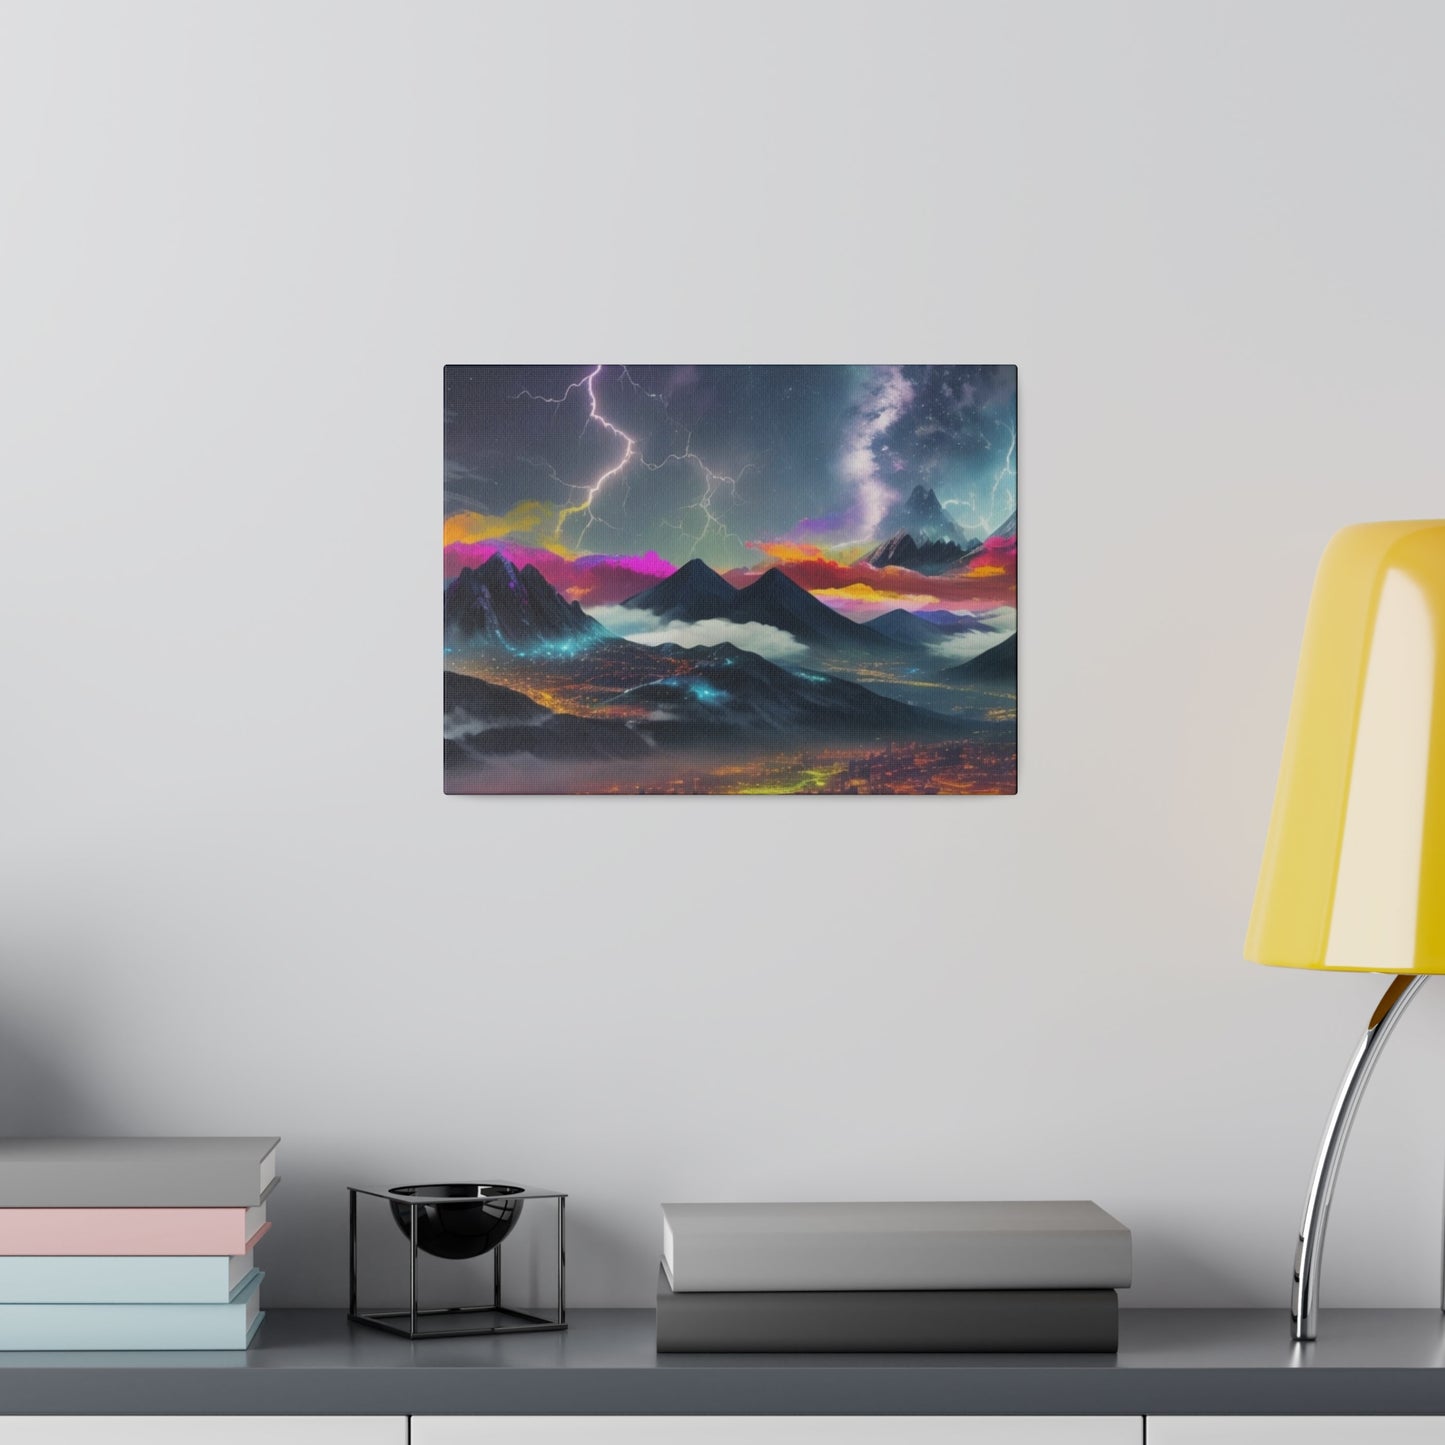 Messy Colourful Lightning Above Mountains - Matte Canvas, Stretched, 0.75"